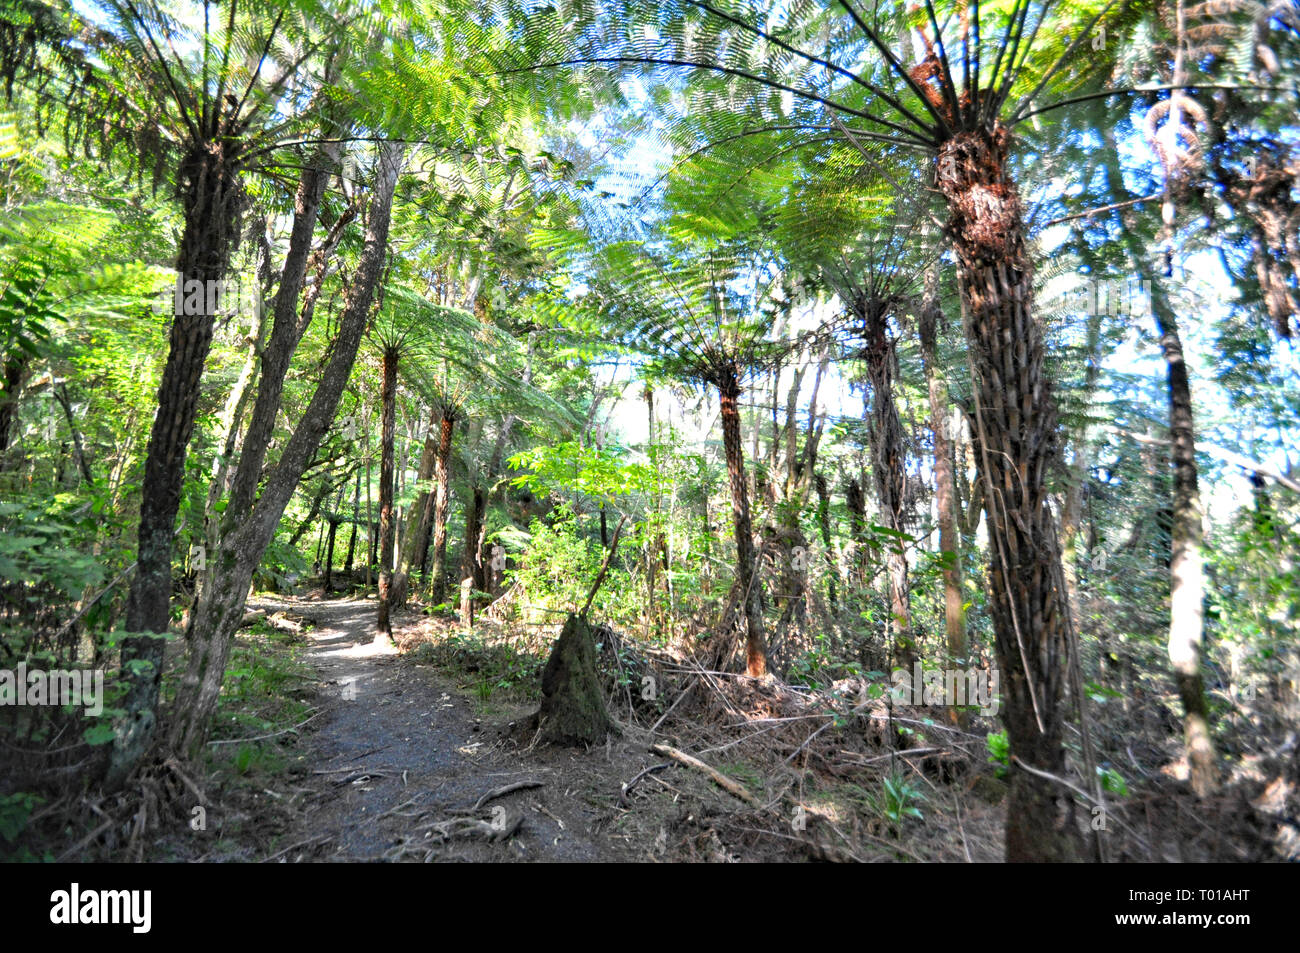 The forest track from the Waitangi Treaty Grounds to Haruru falls. Stock Photo